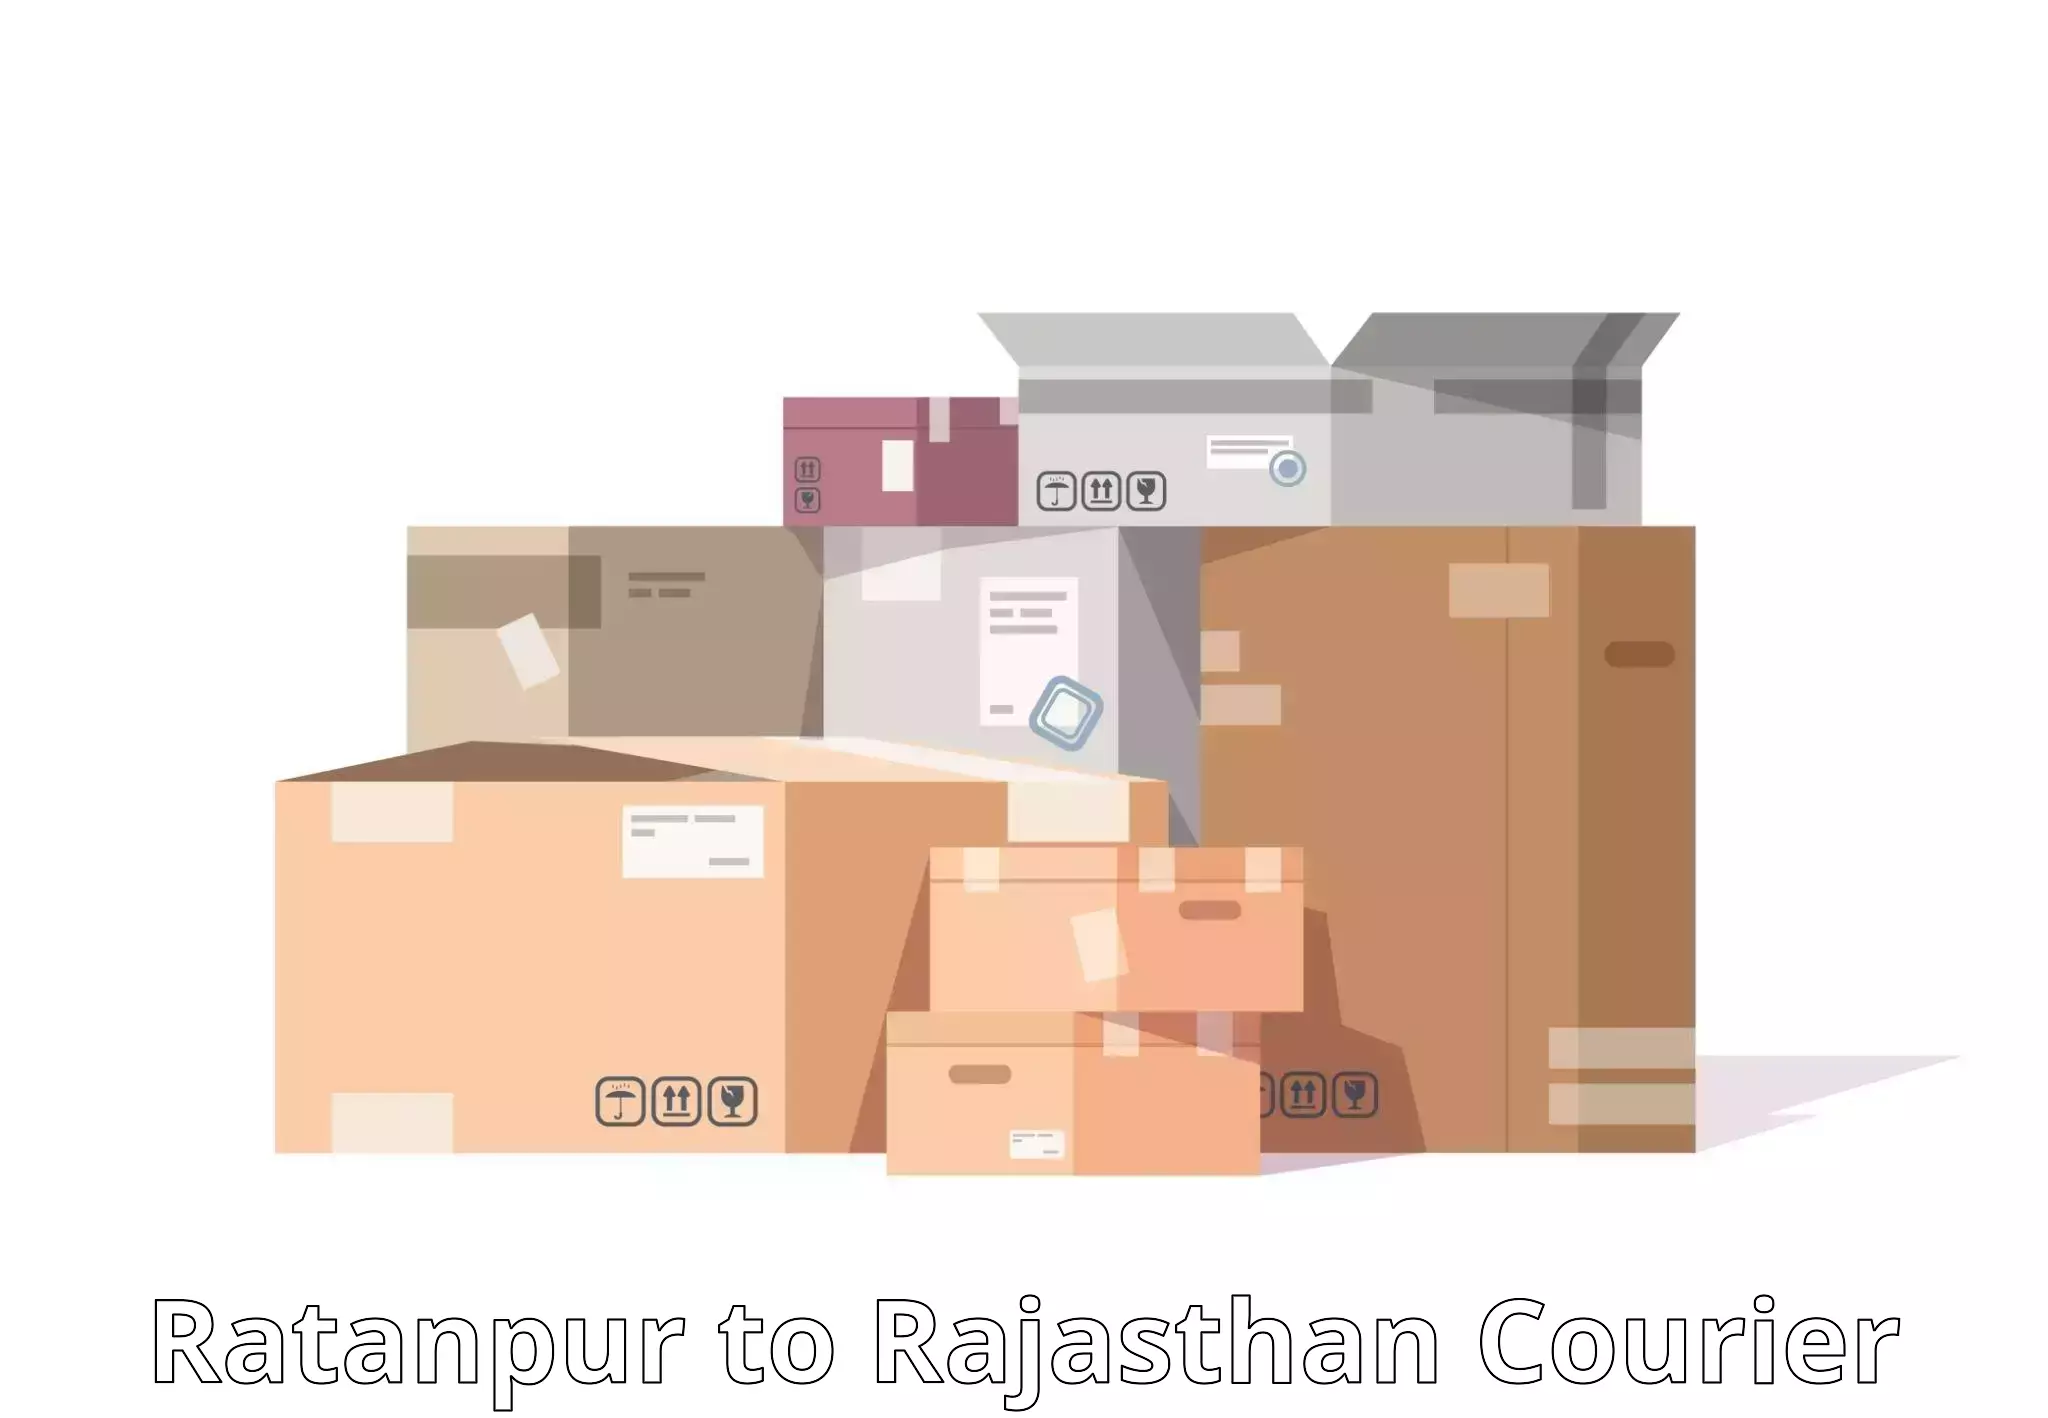 Enhanced delivery experience in Ratanpur to Dhorimana